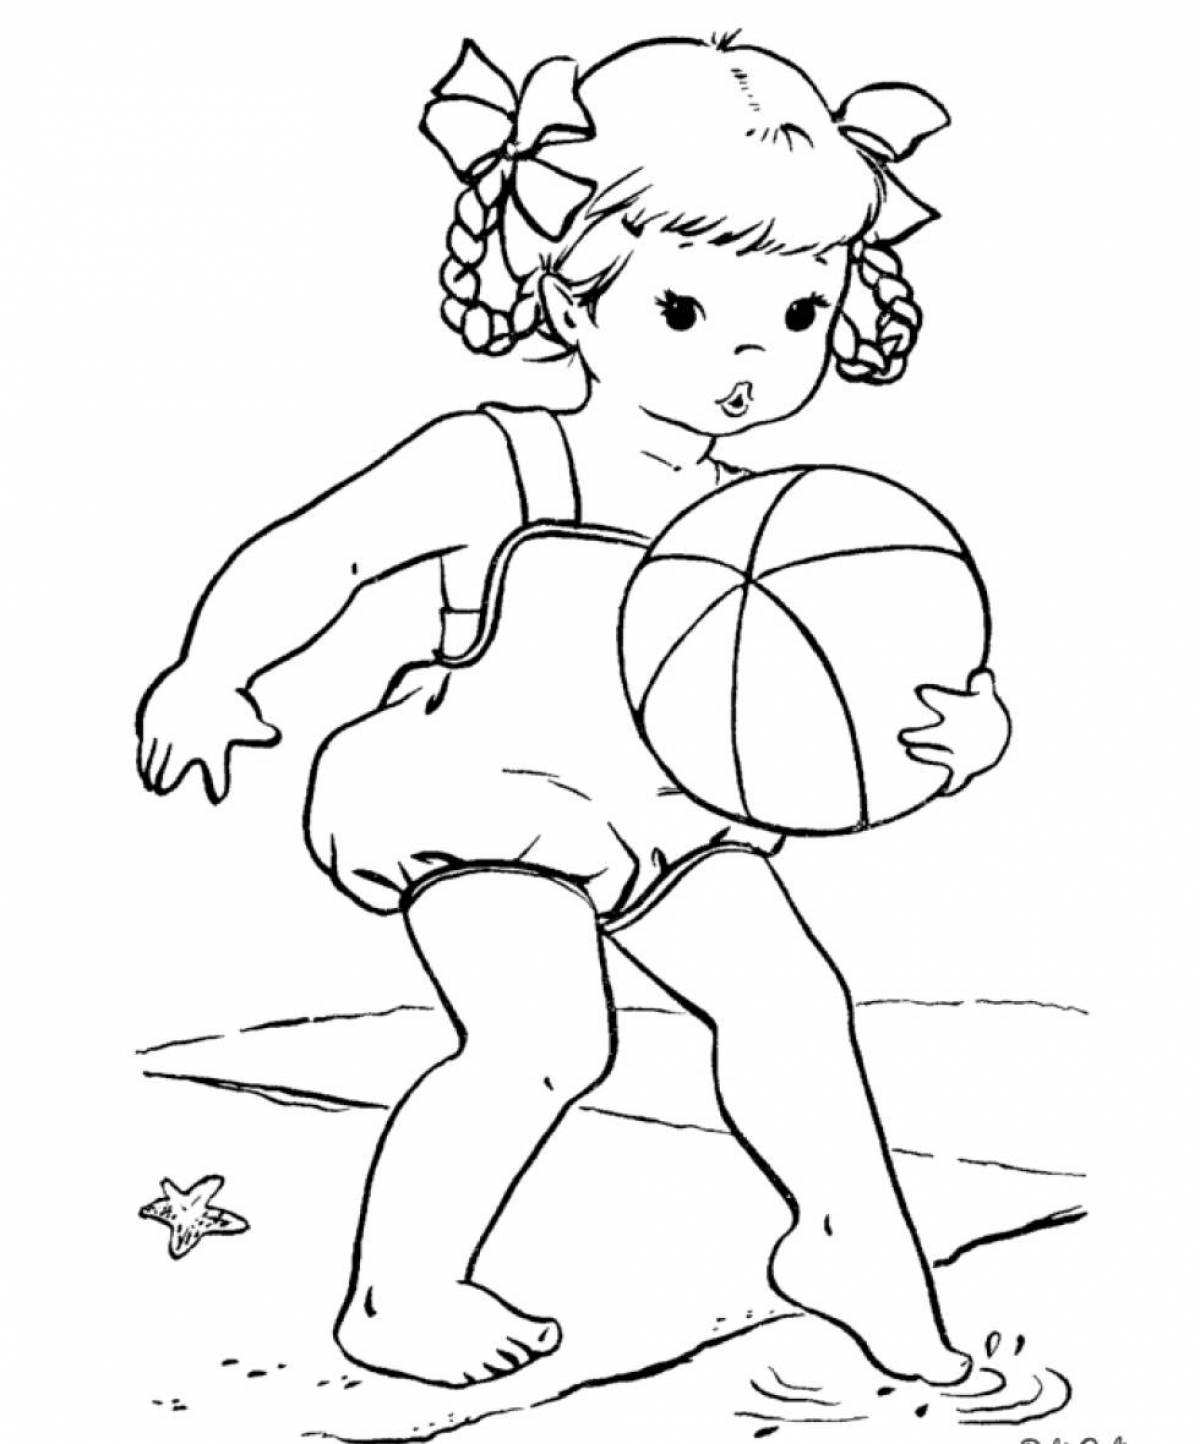 The edge of the joyous babys coloring page